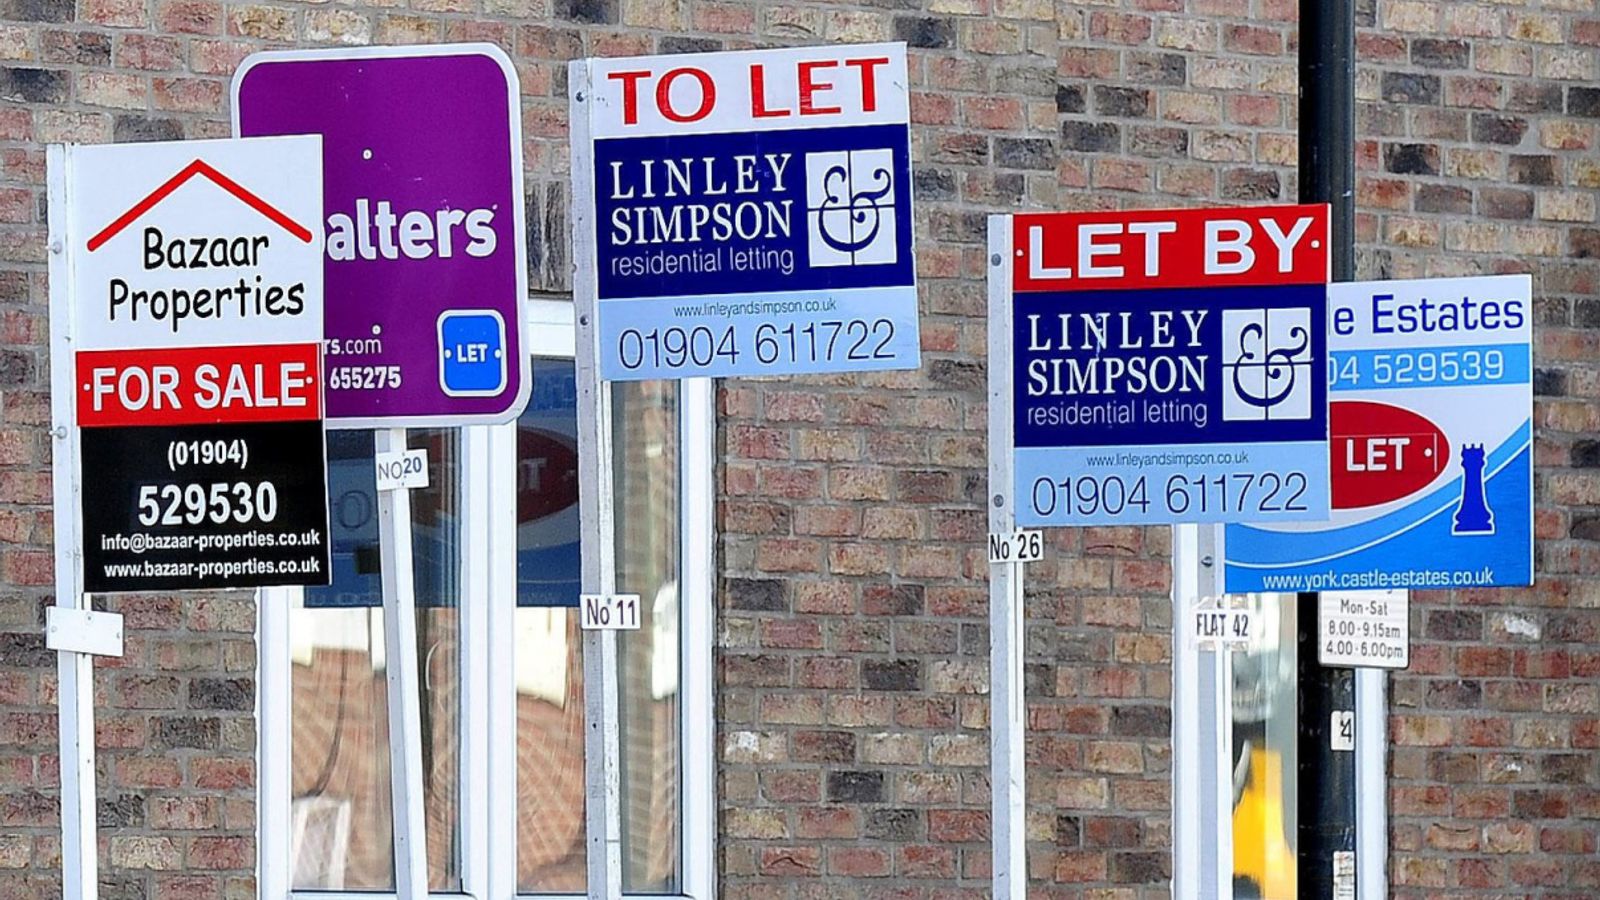 House prices rise higher than expected in January alongside 'pent-up' buyer demand